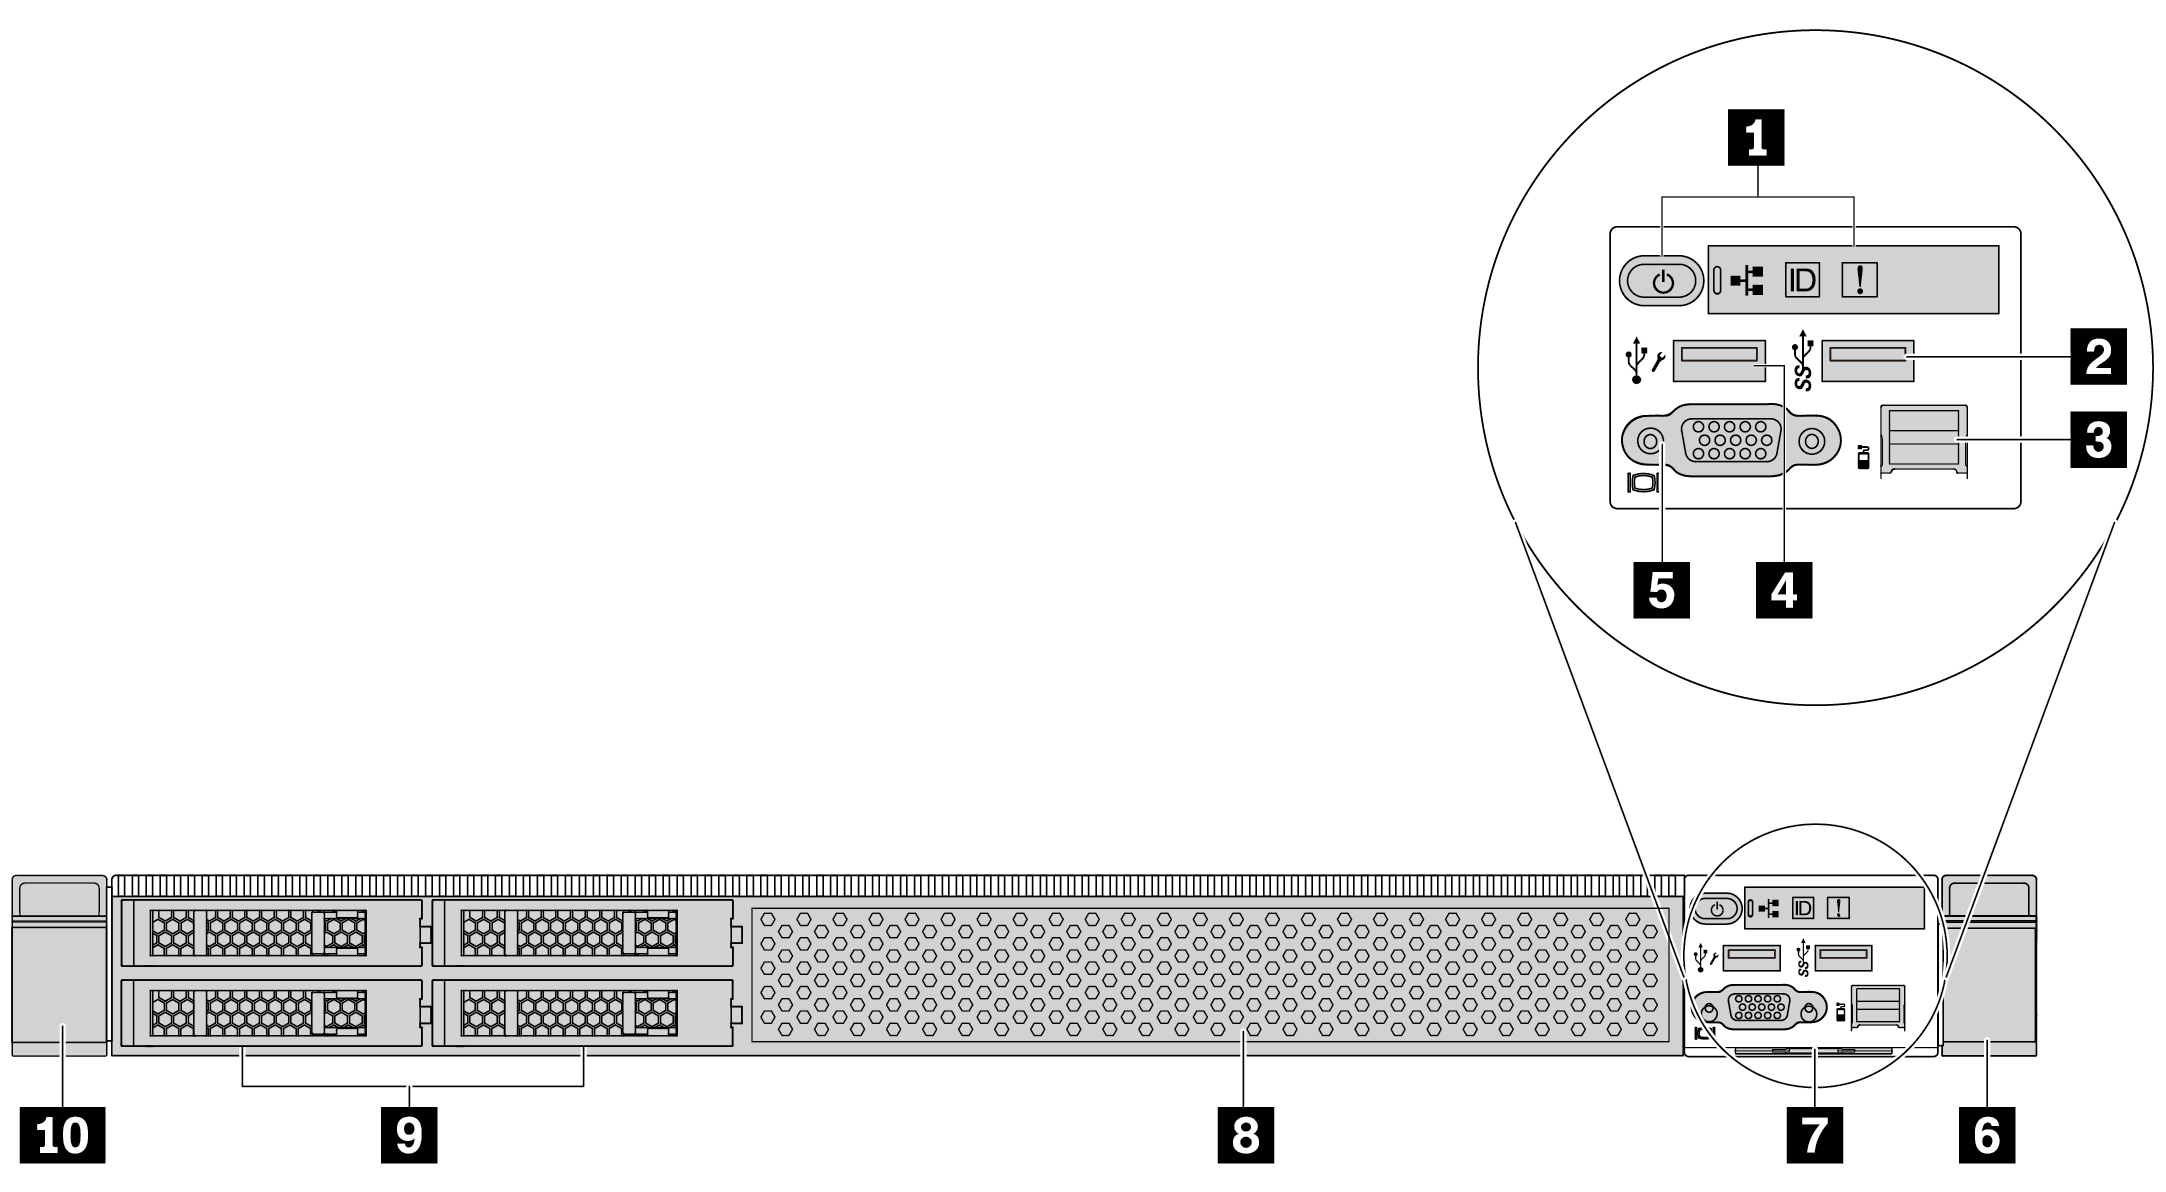 Front view of server model without a backplane (for eight 2.5-inch drive bays)